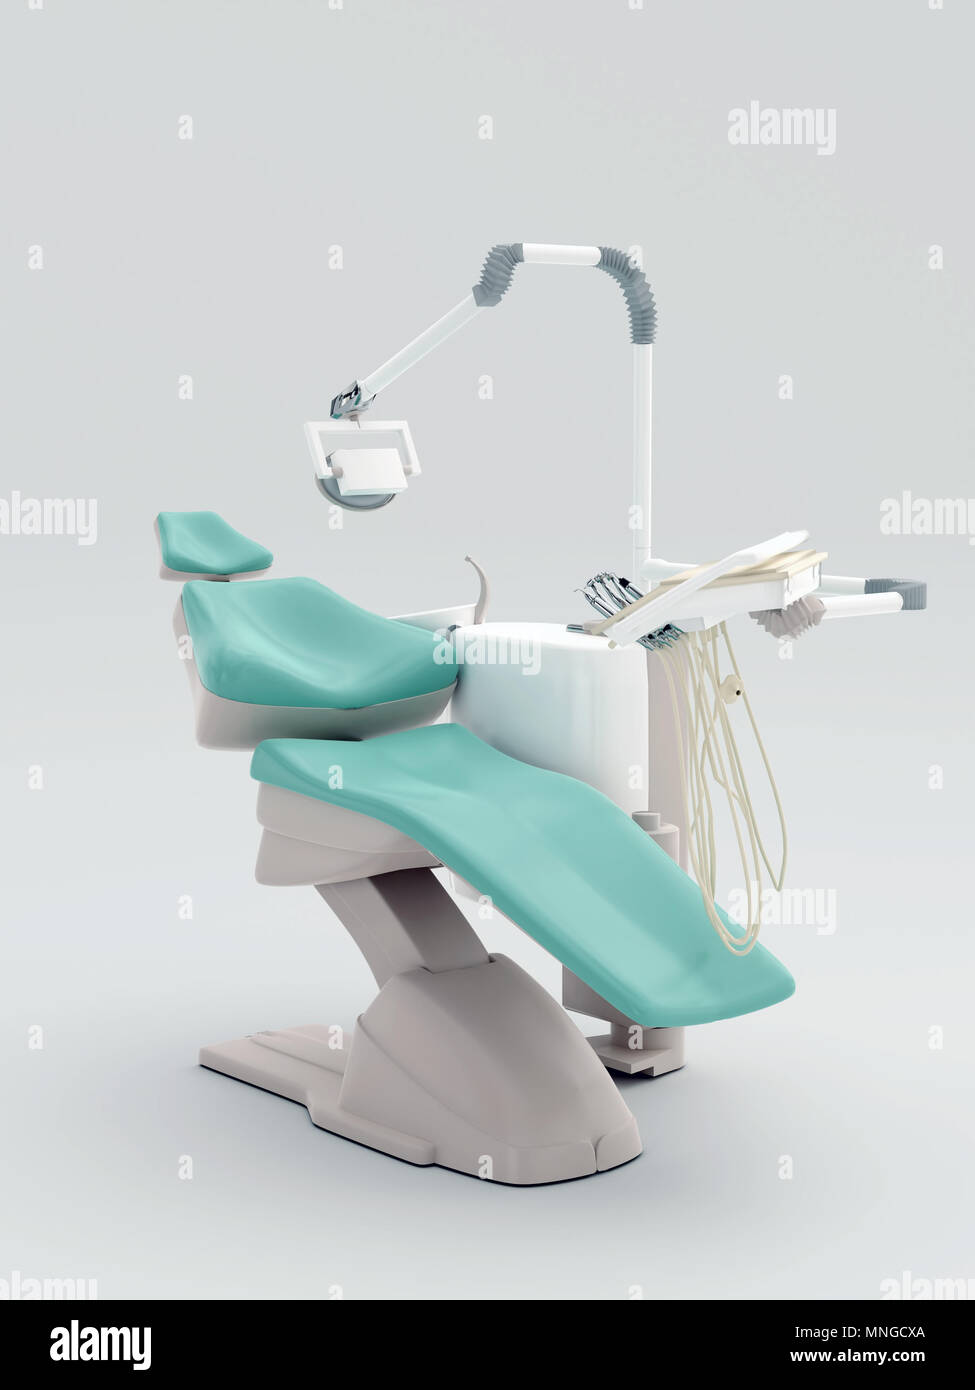 3D render of modern dental chair with equipment Stock Photo